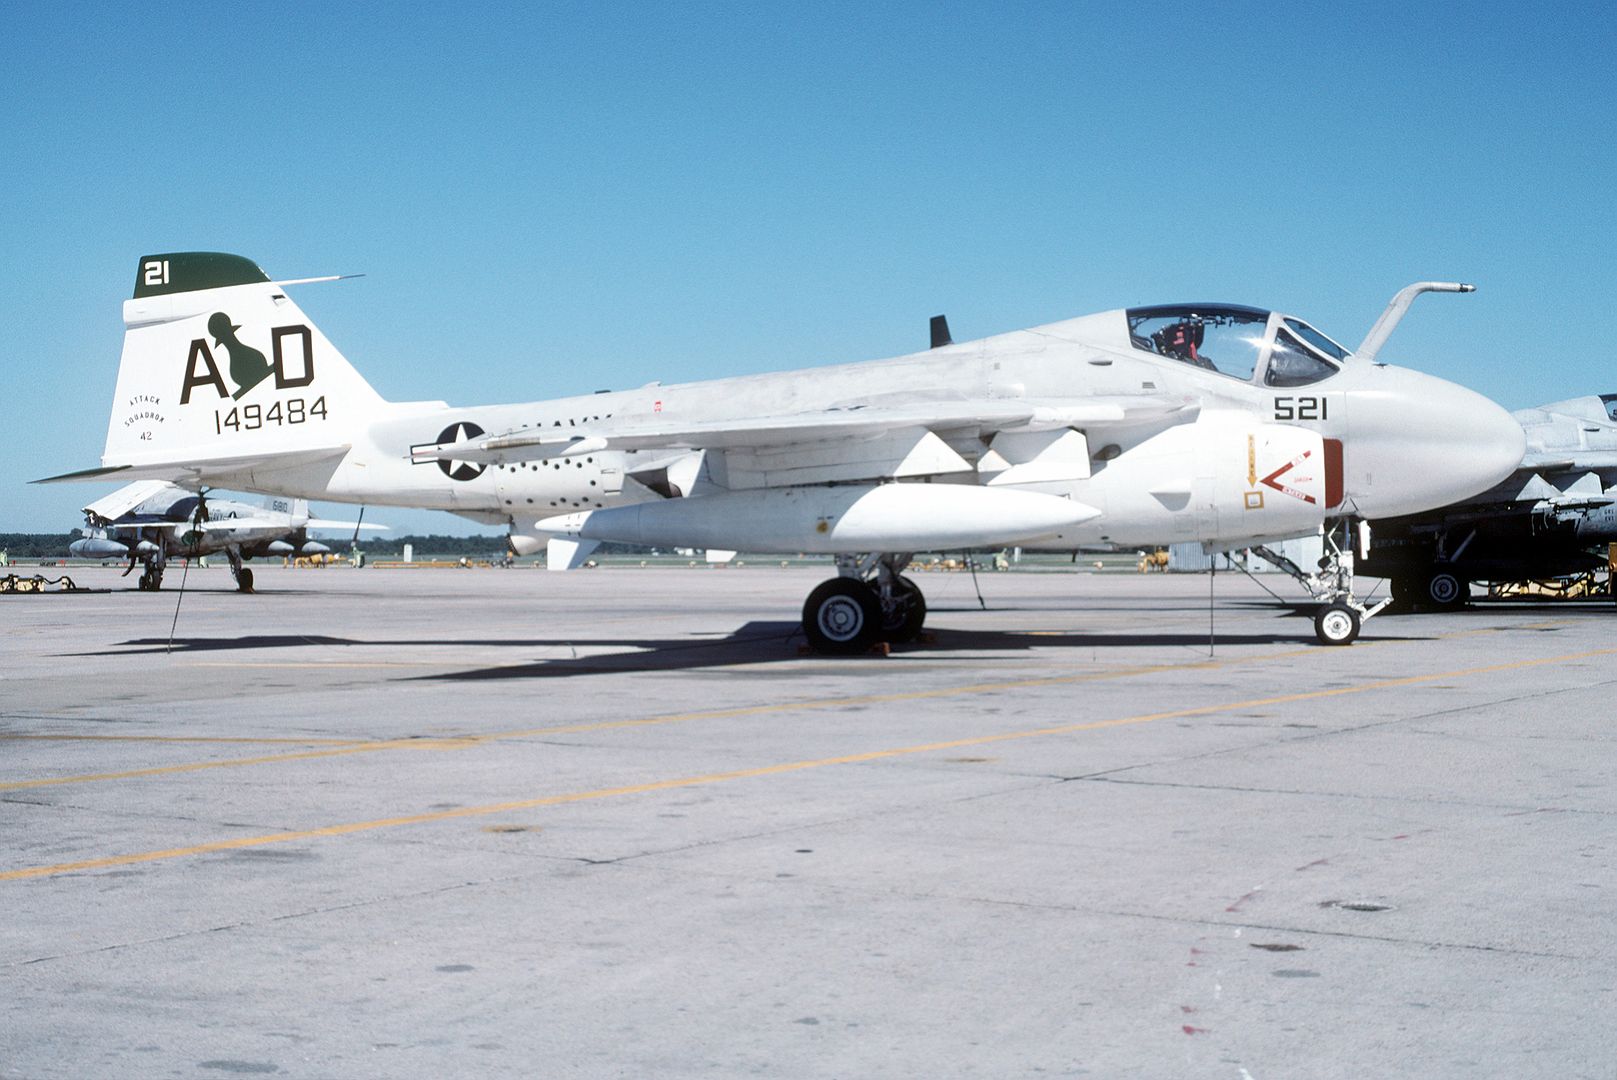  The Aircraft Exhibits The Paint Scheme Used In 1986